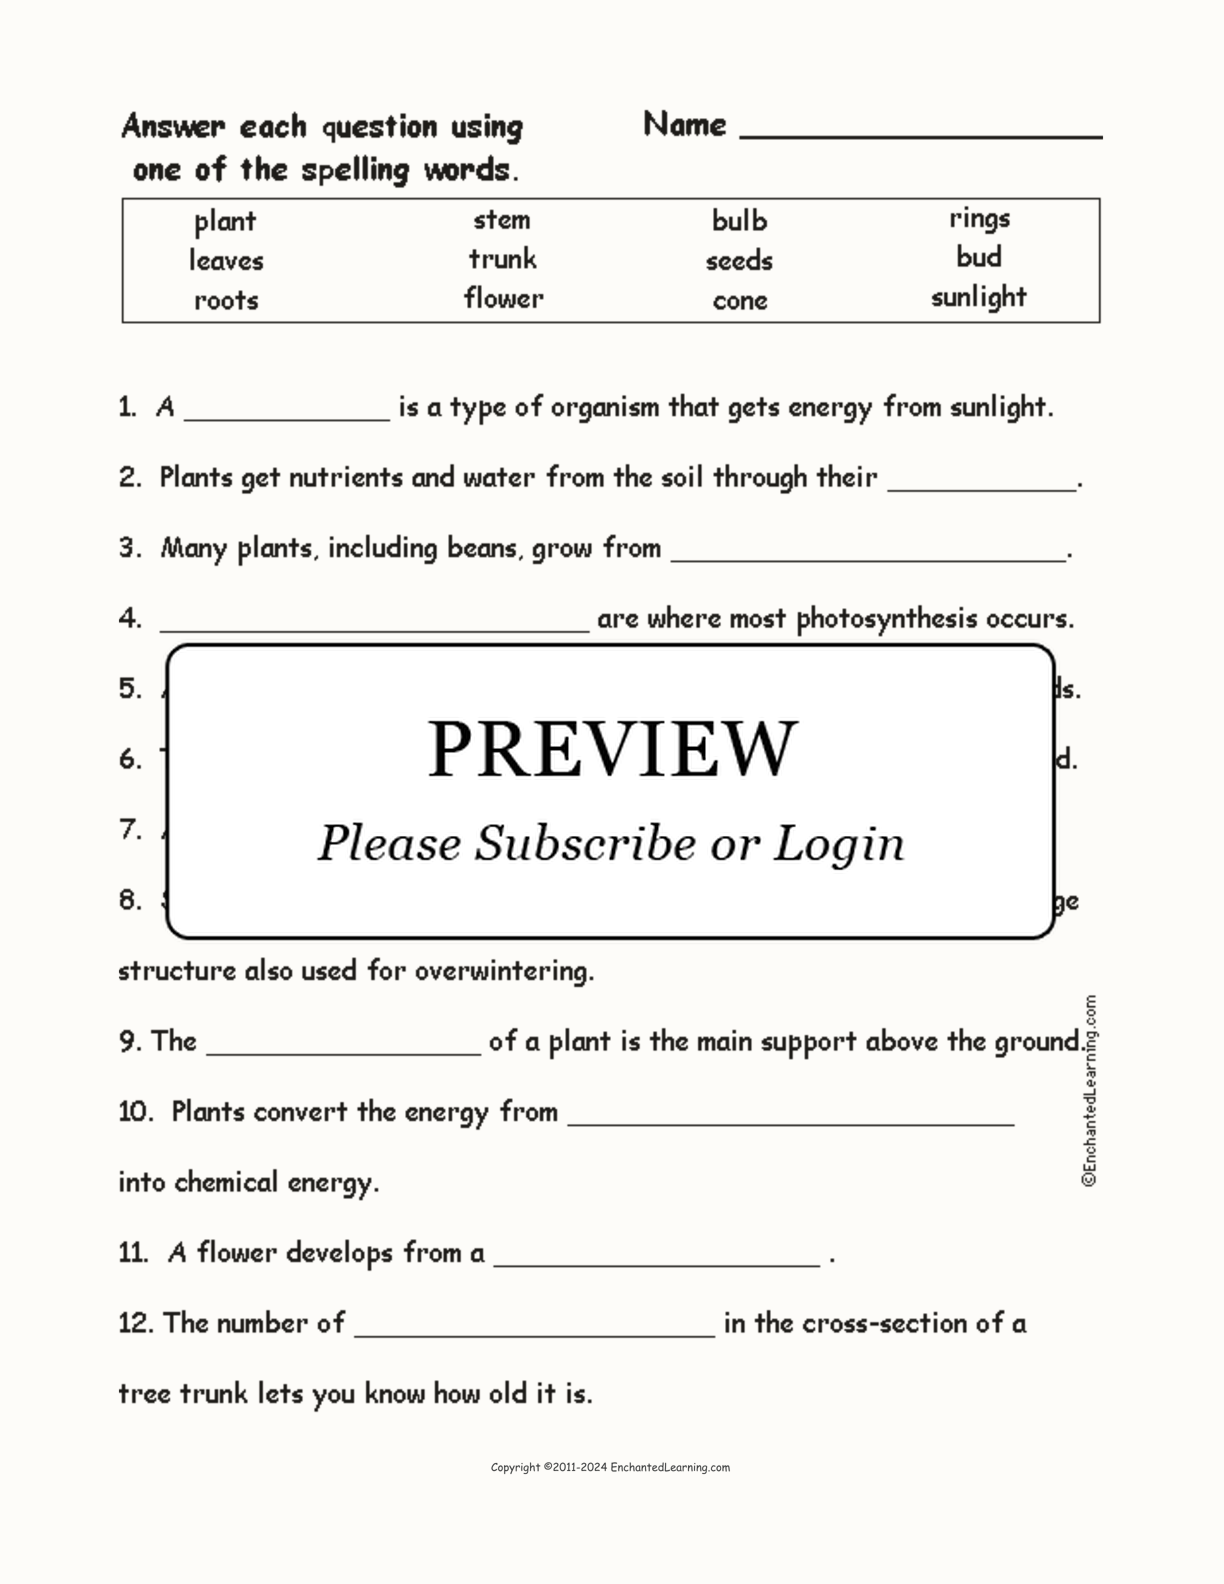 Plant-Related Spelling Word Questions interactive worksheet page 1